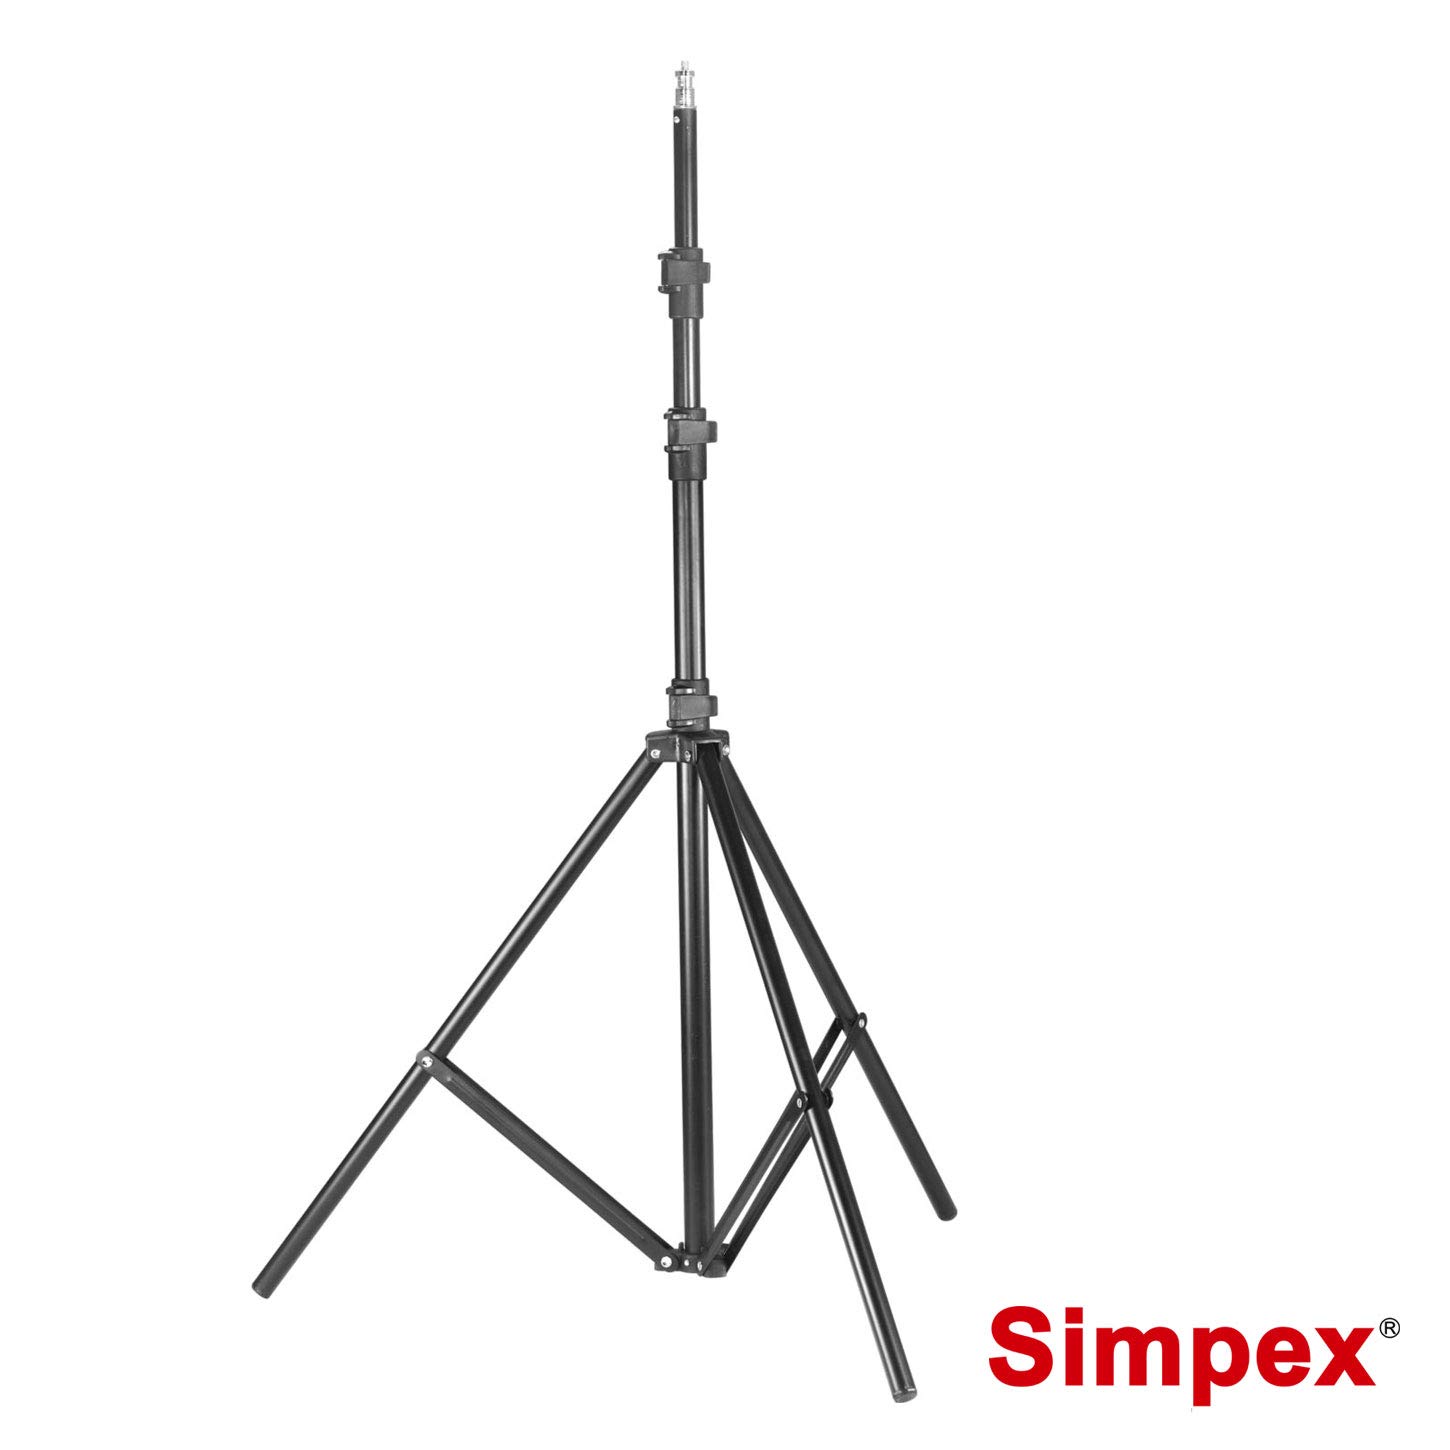 Simpex Porta Kit with a Pair of Light Stand 9 Feet and Umbrella for Video and Still Photography 